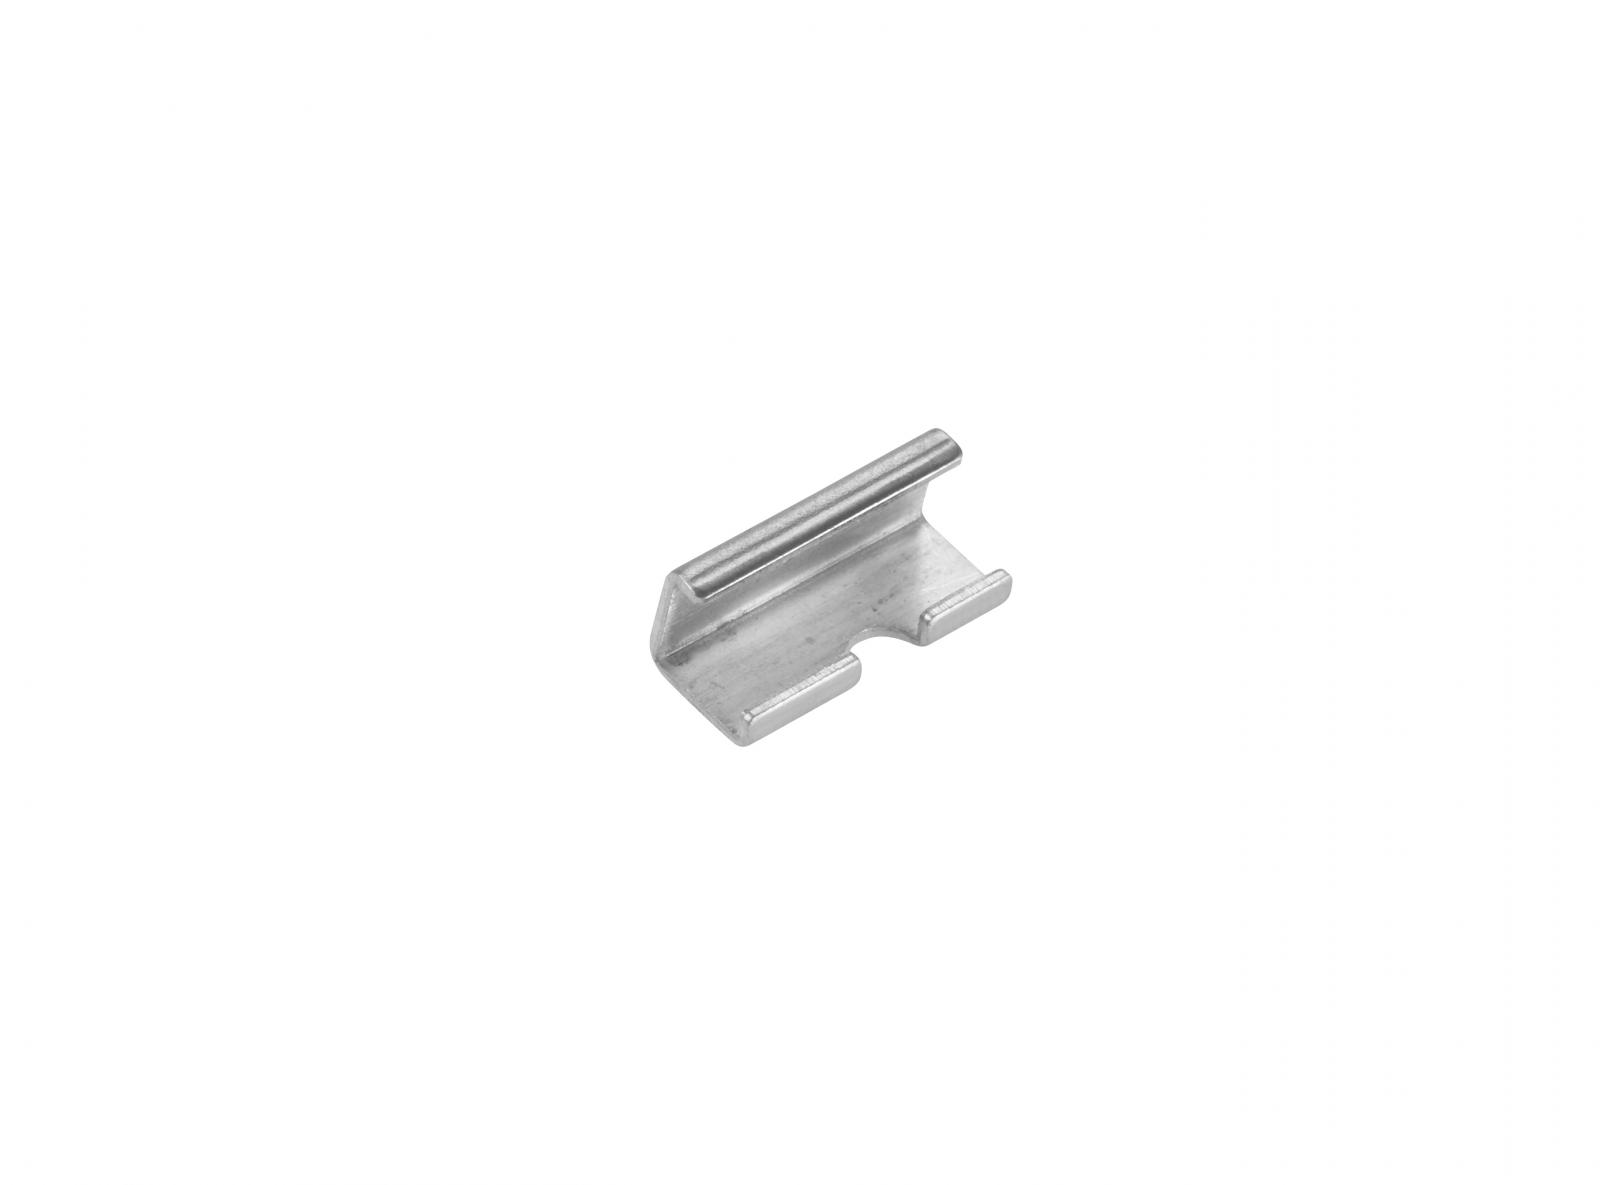 TapeTech® Center Clip. Part number 480017F